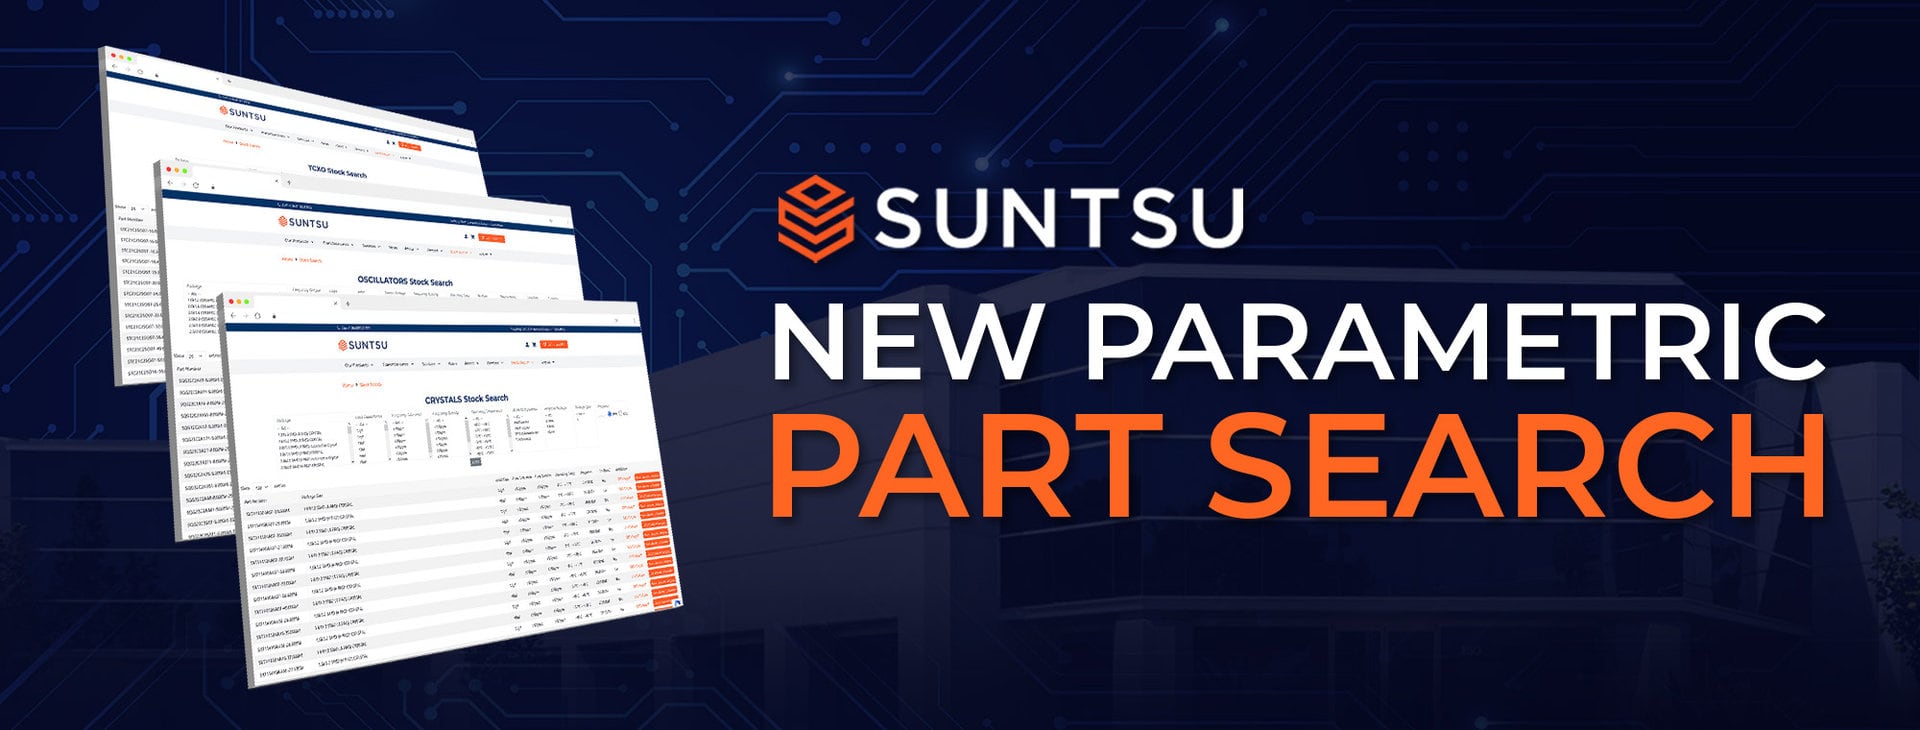 Suntsu’s New Parametric Part Search Helps Make Your Project a Reality